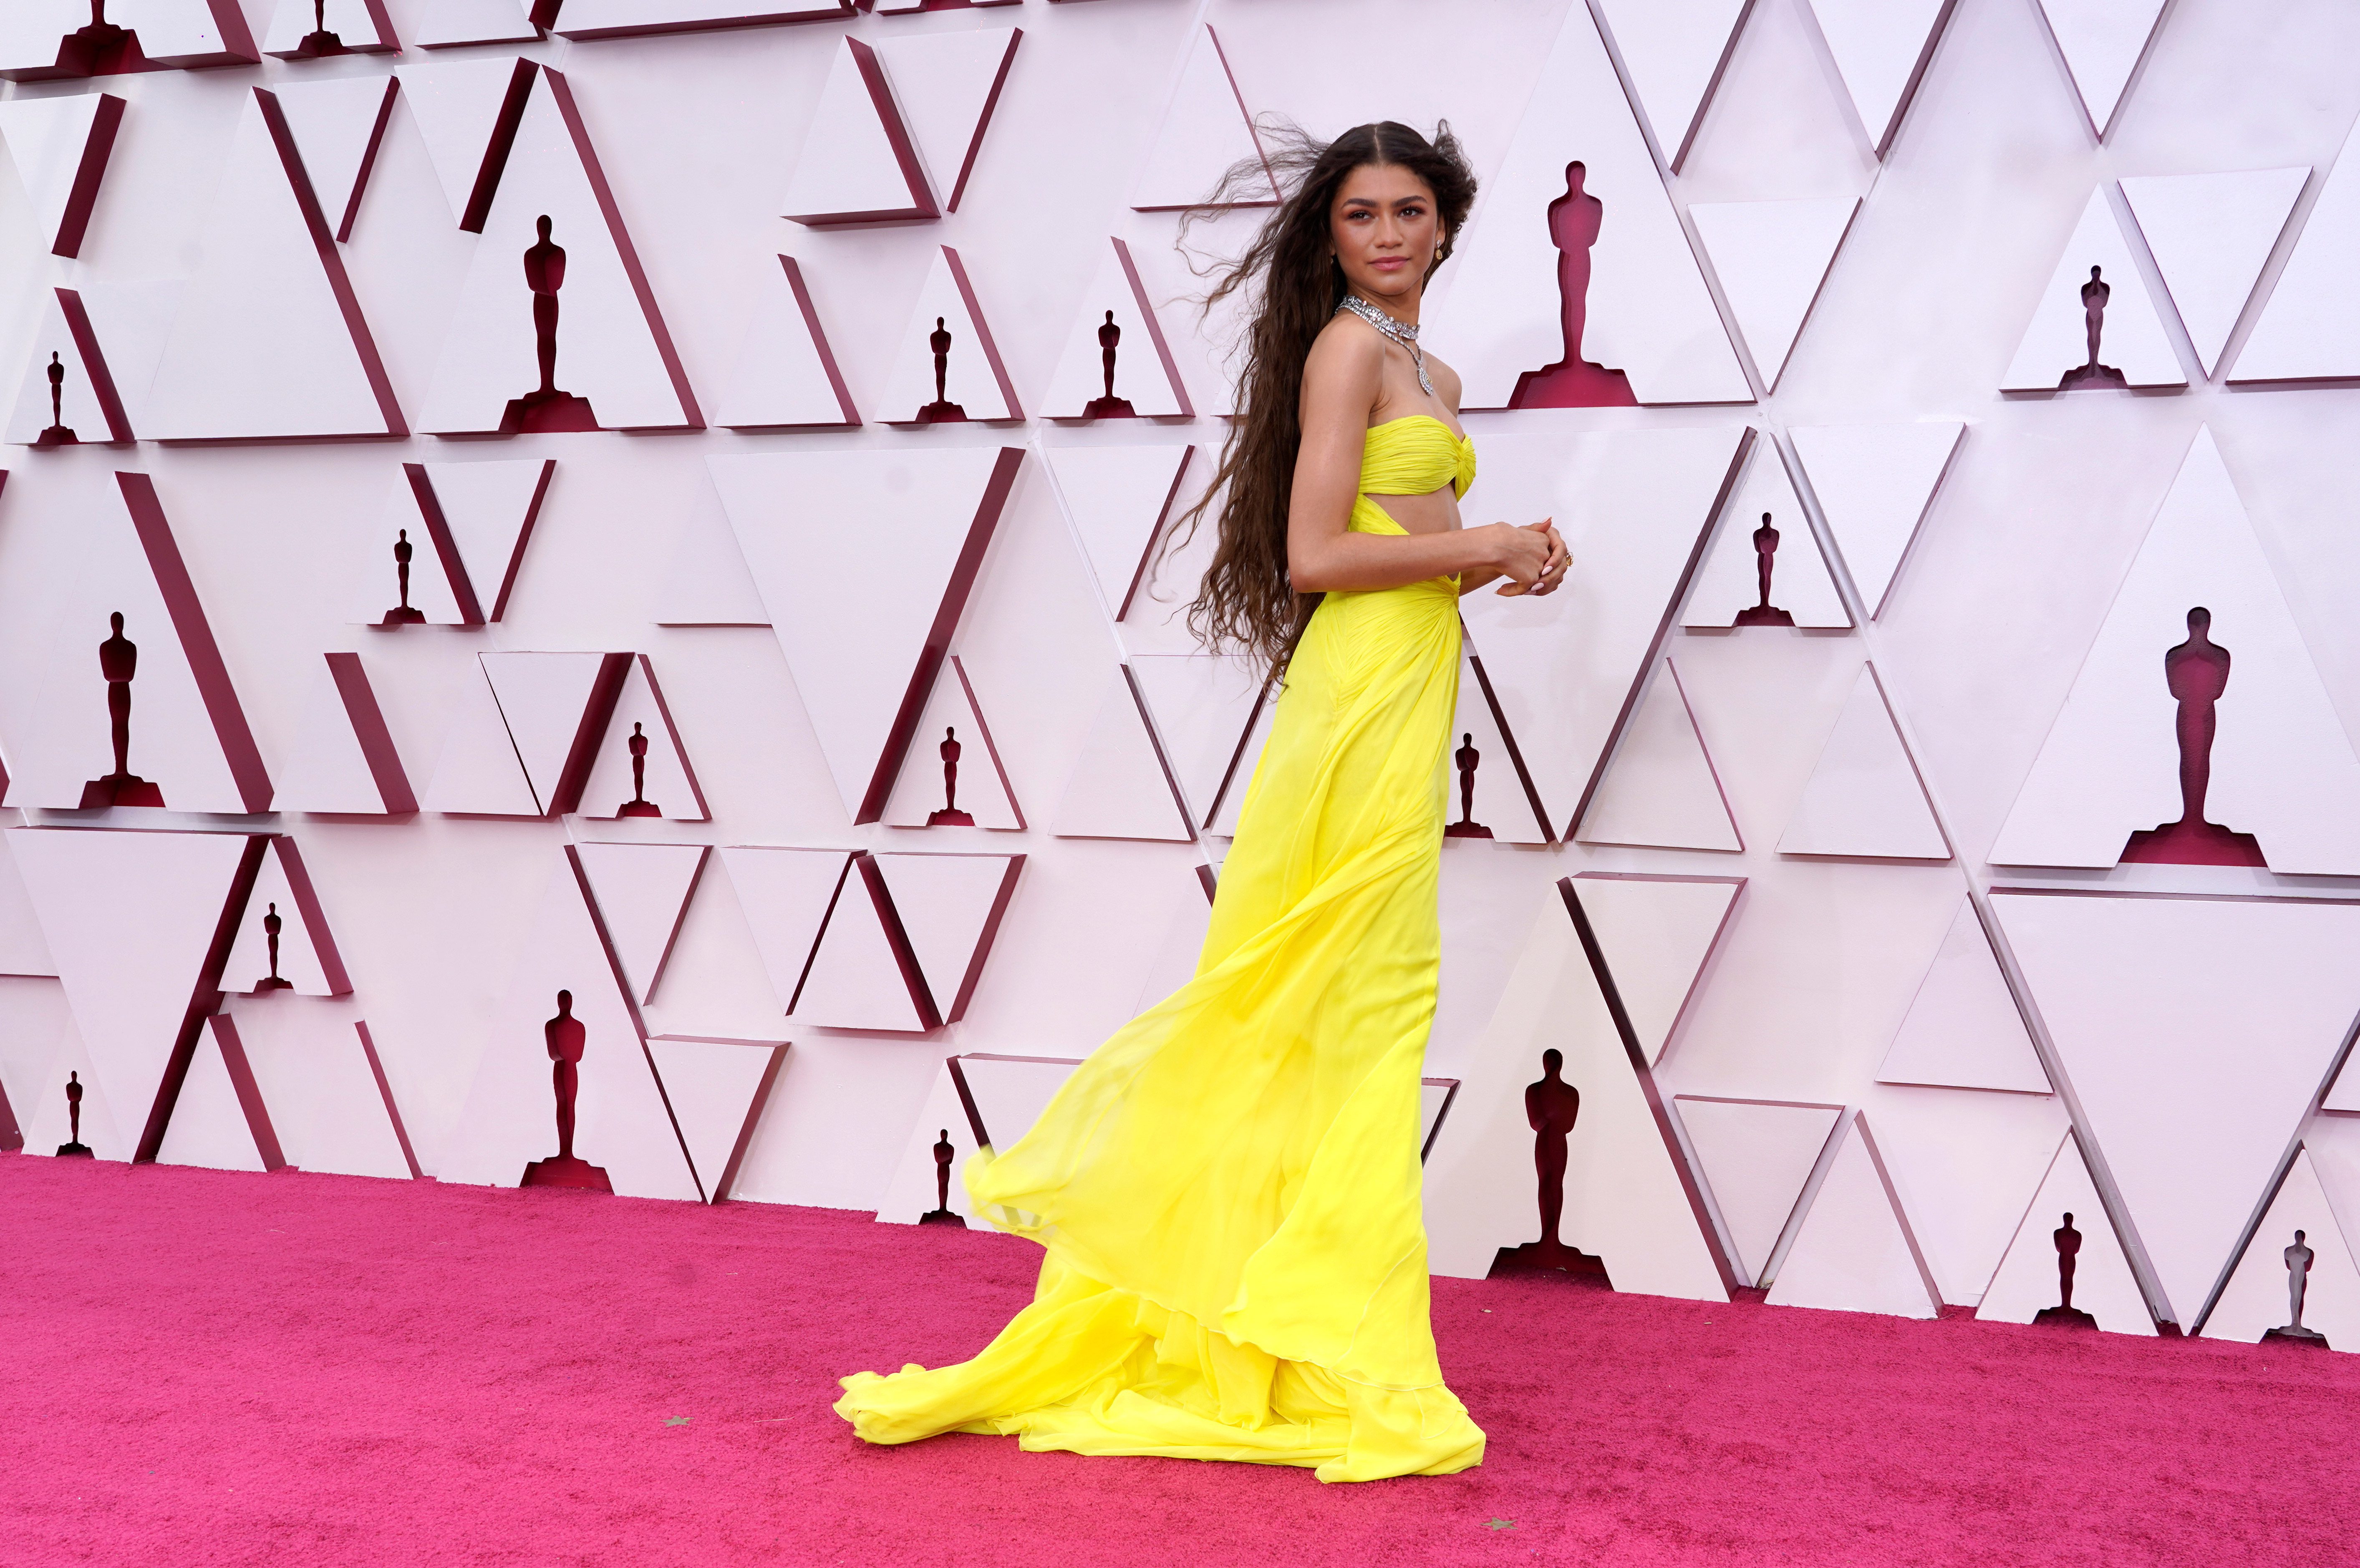 IN PHOTOS: Stars step back onto Oscars red carpet